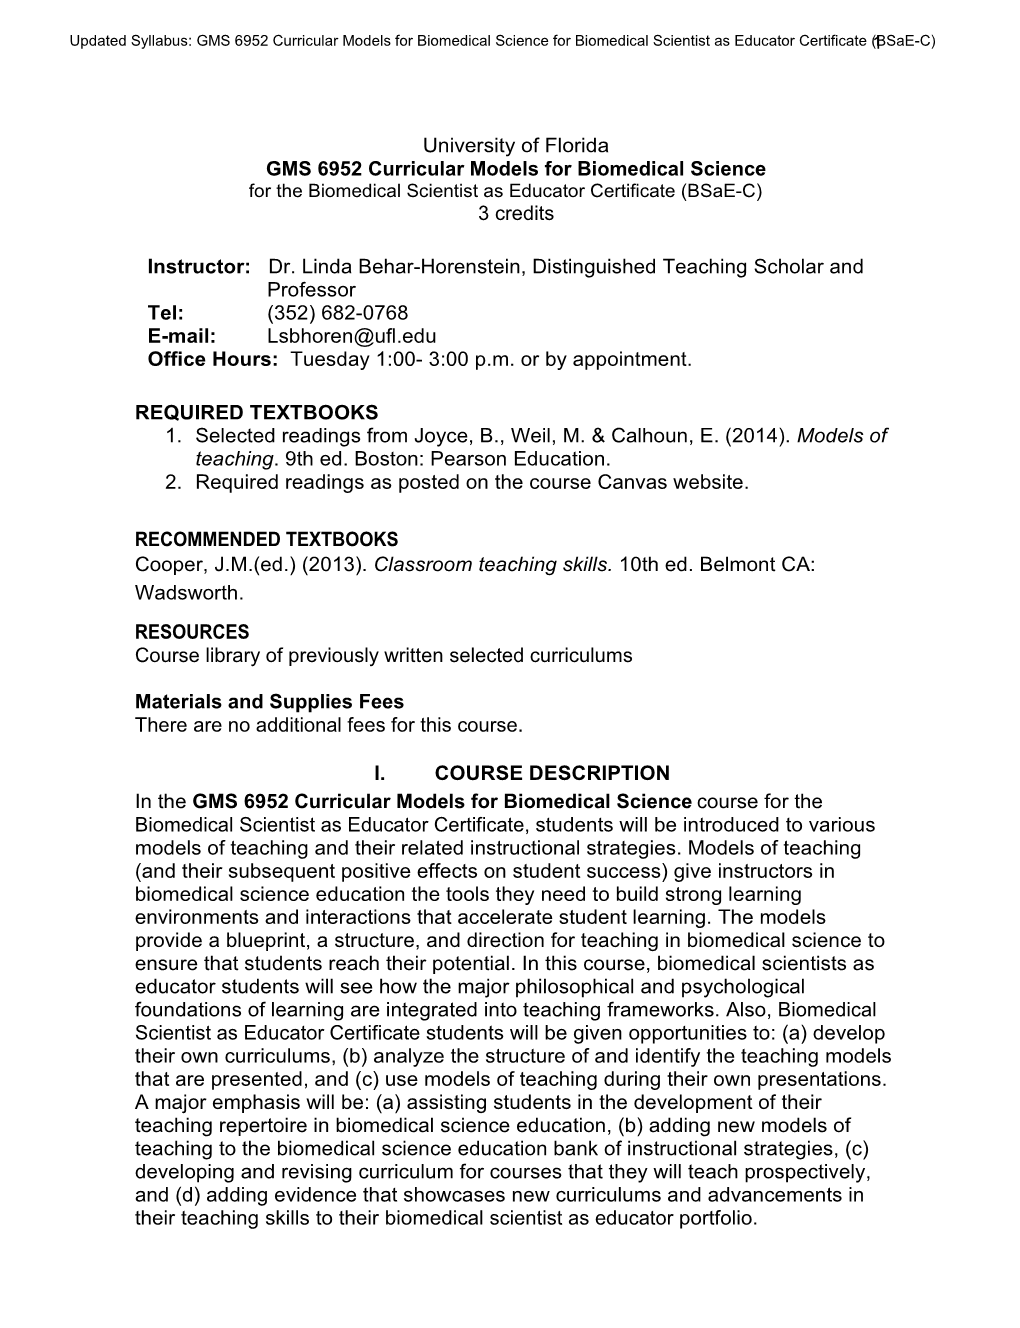 University of Florida GMS 6952 Curricular Models for Biomedical Science for the Biomedical Scientist As Educator Certificate (Bsae-C) 3 Credits